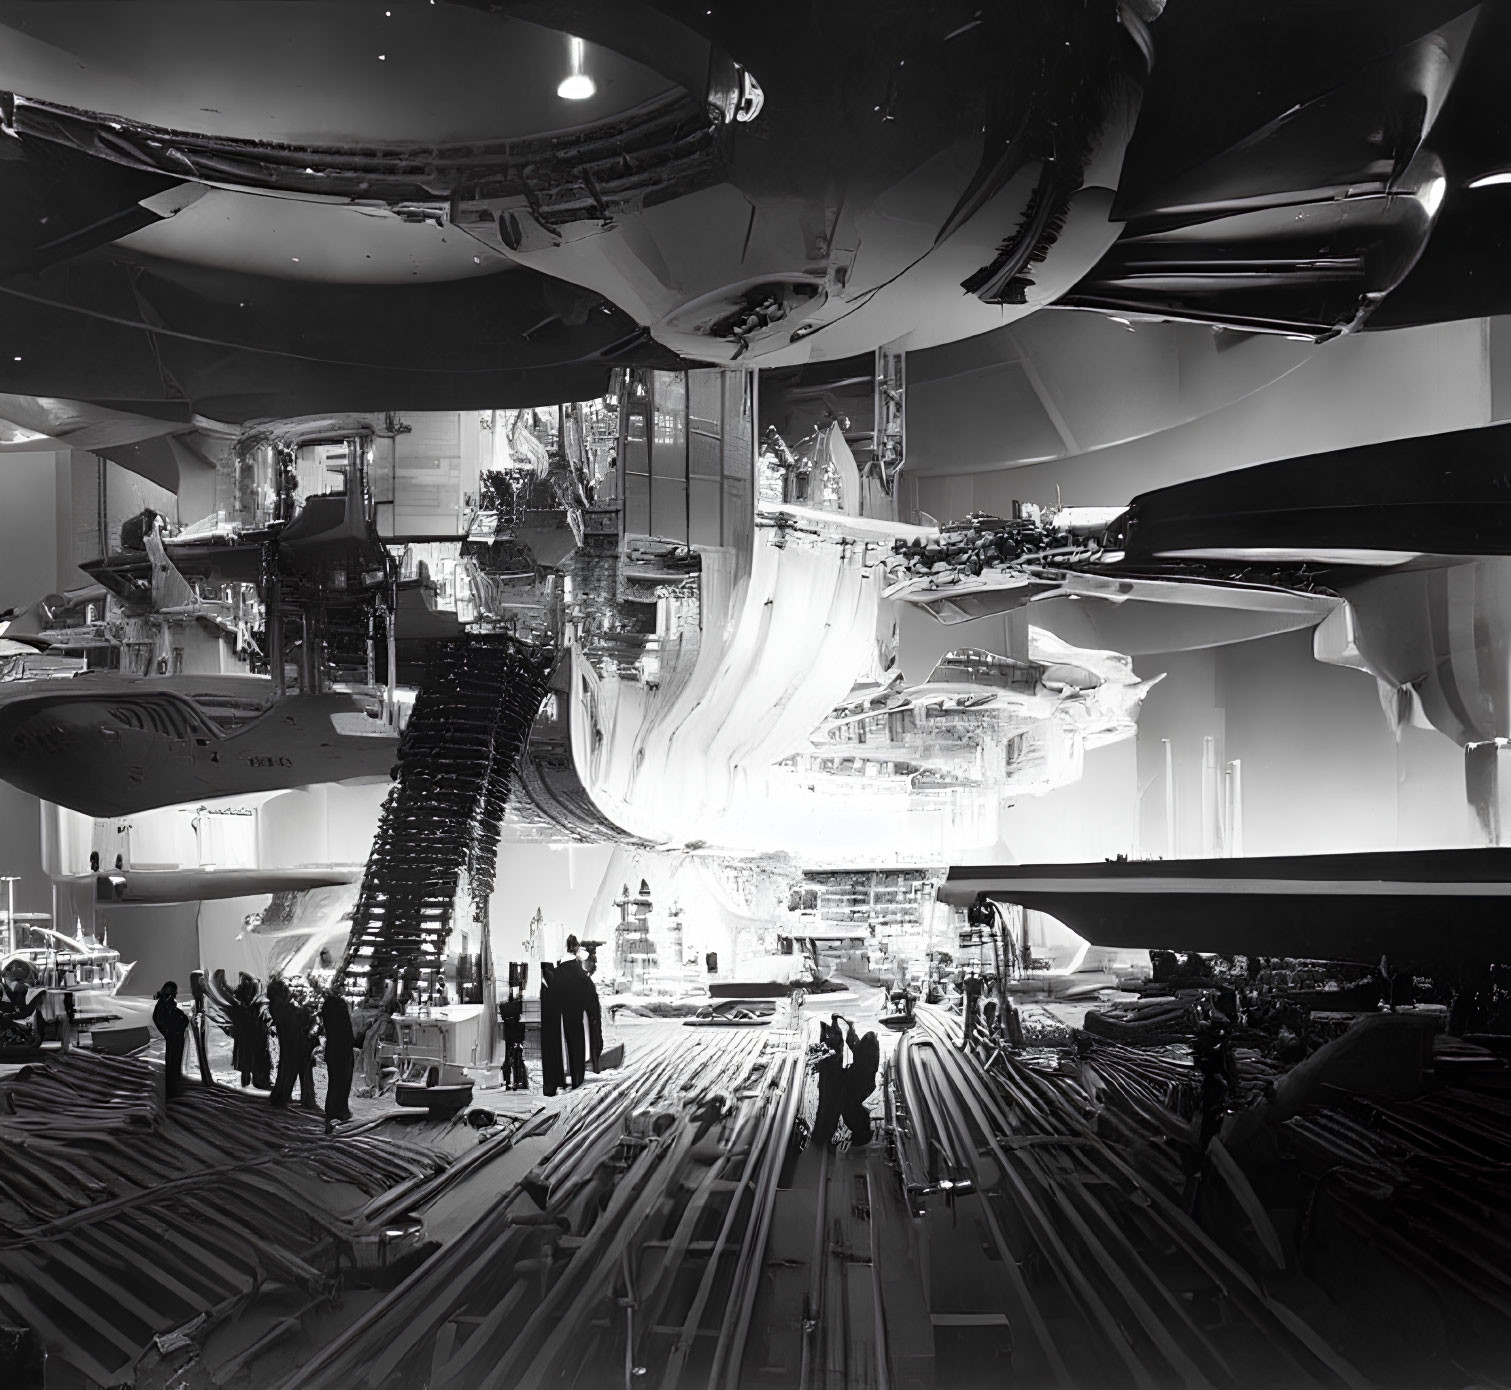 Black and white image of workers constructing a large airplane in a hangar